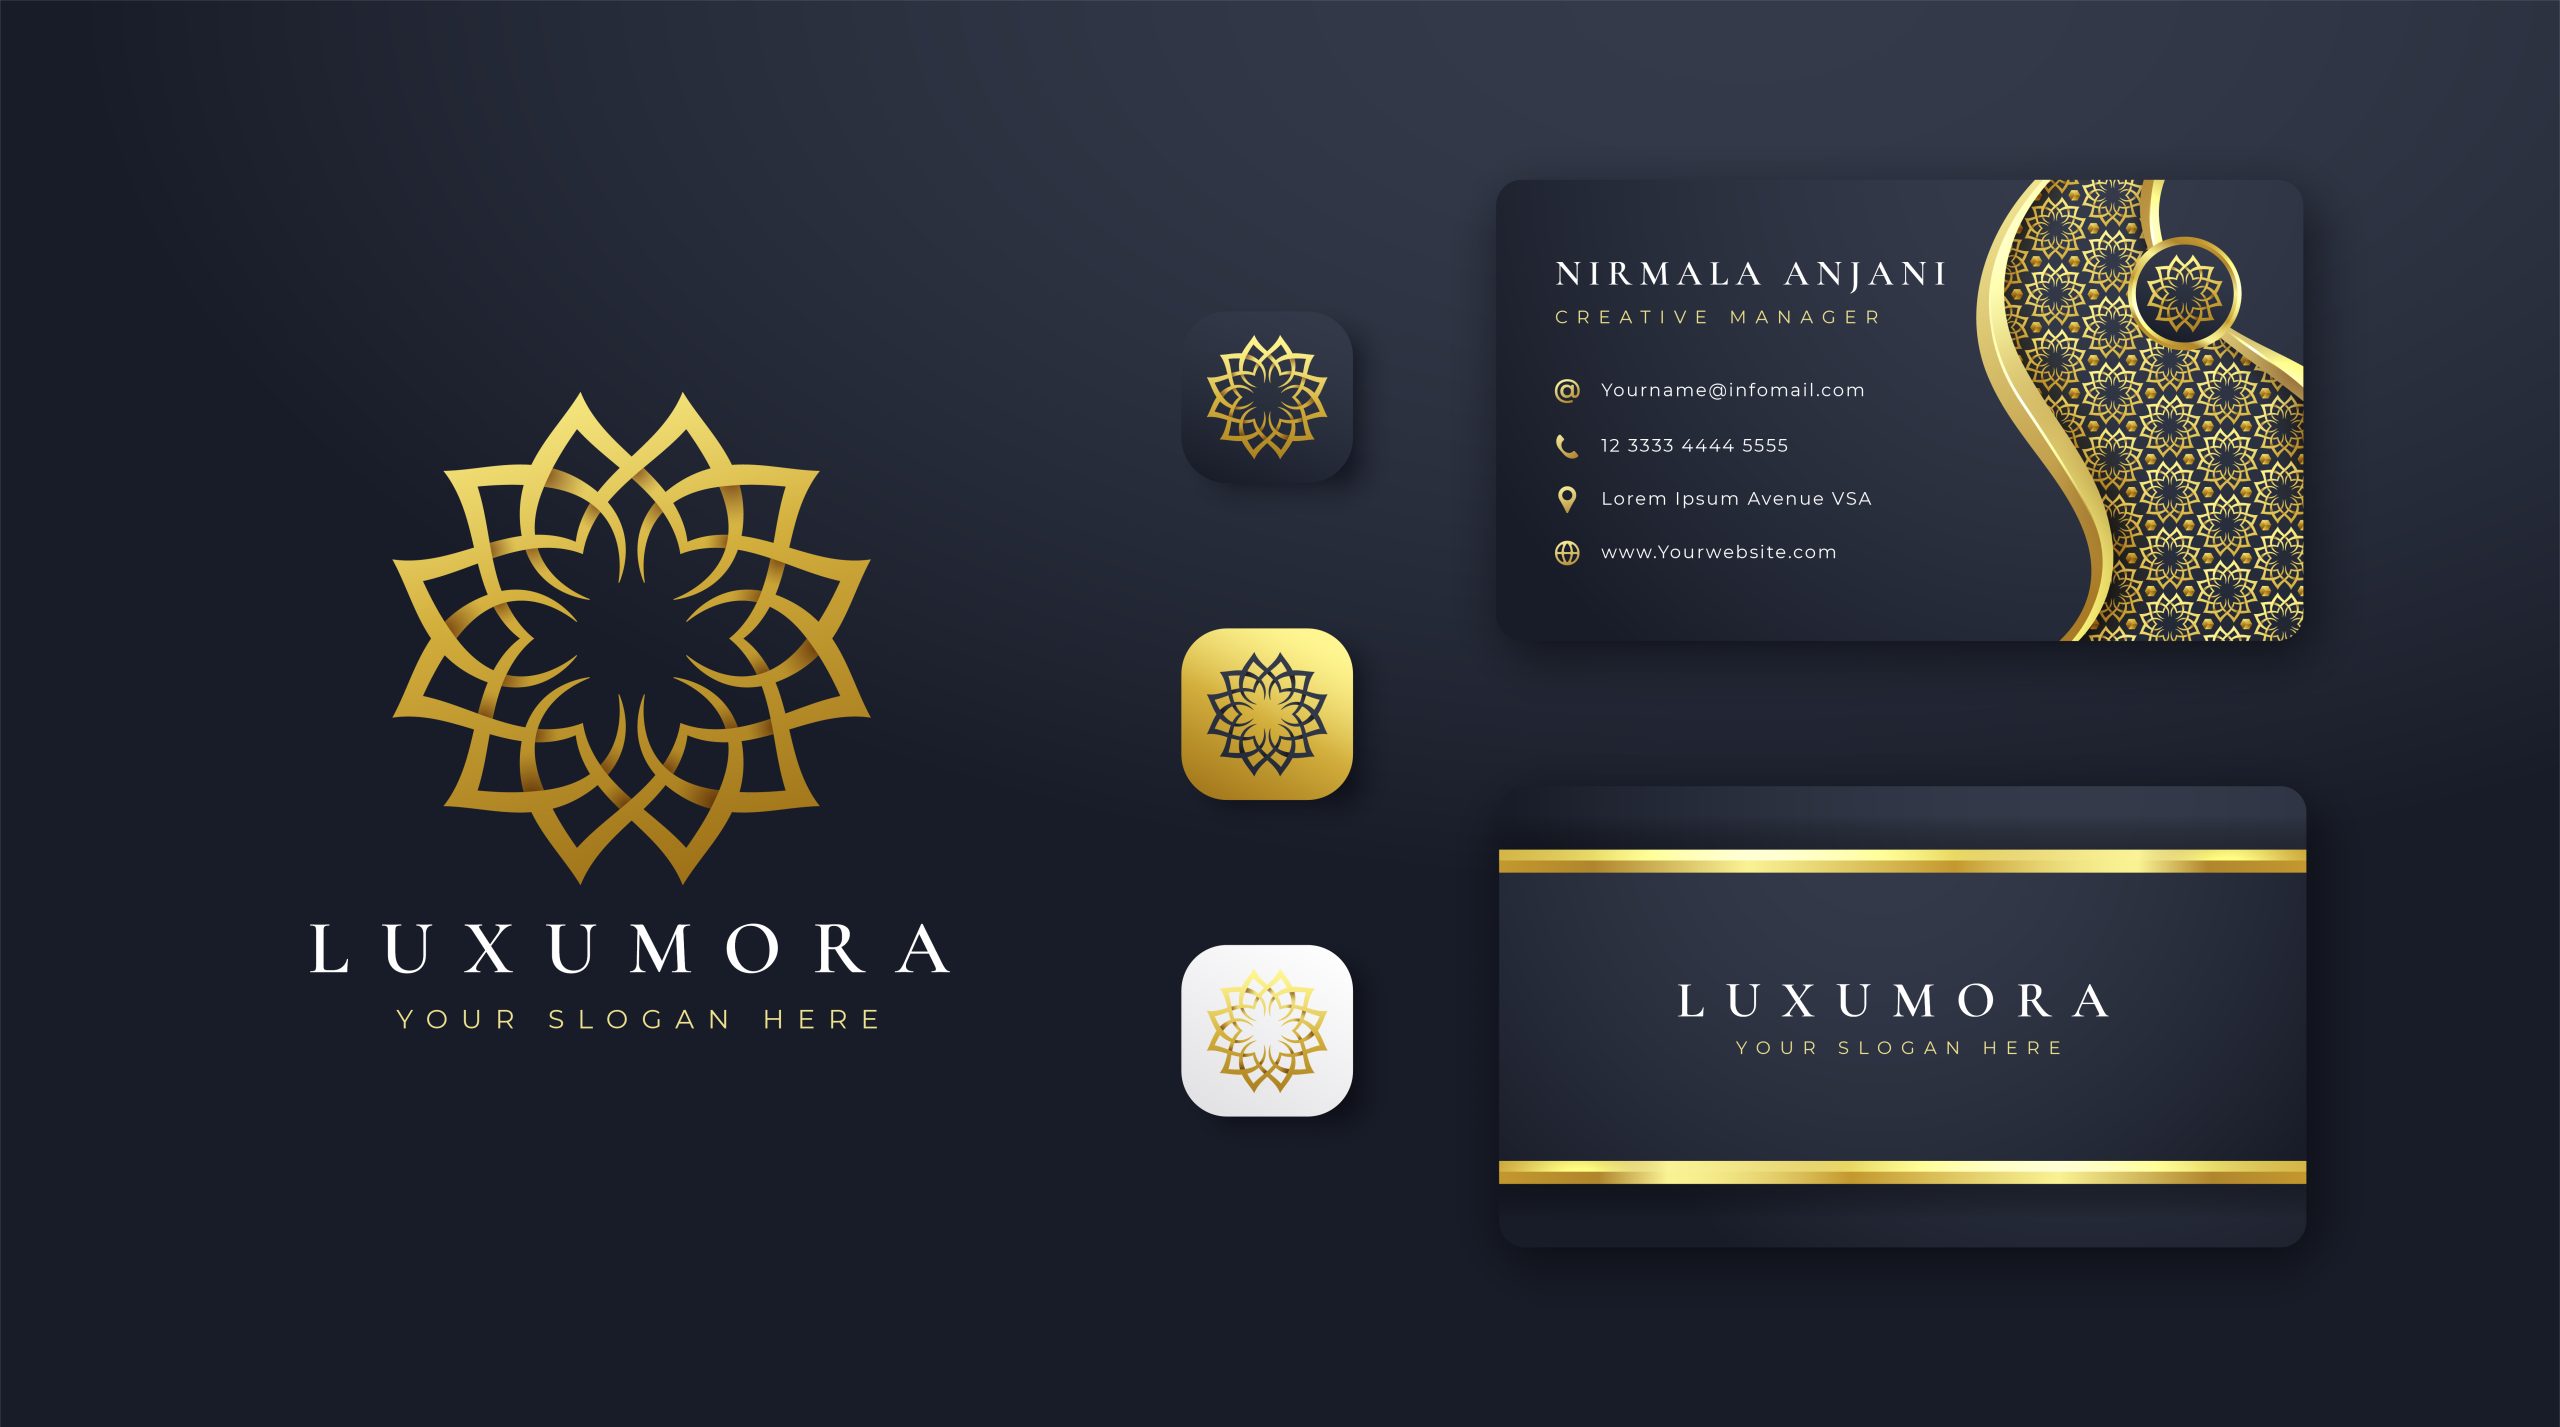 Luxury Business Card Template 02 scaled